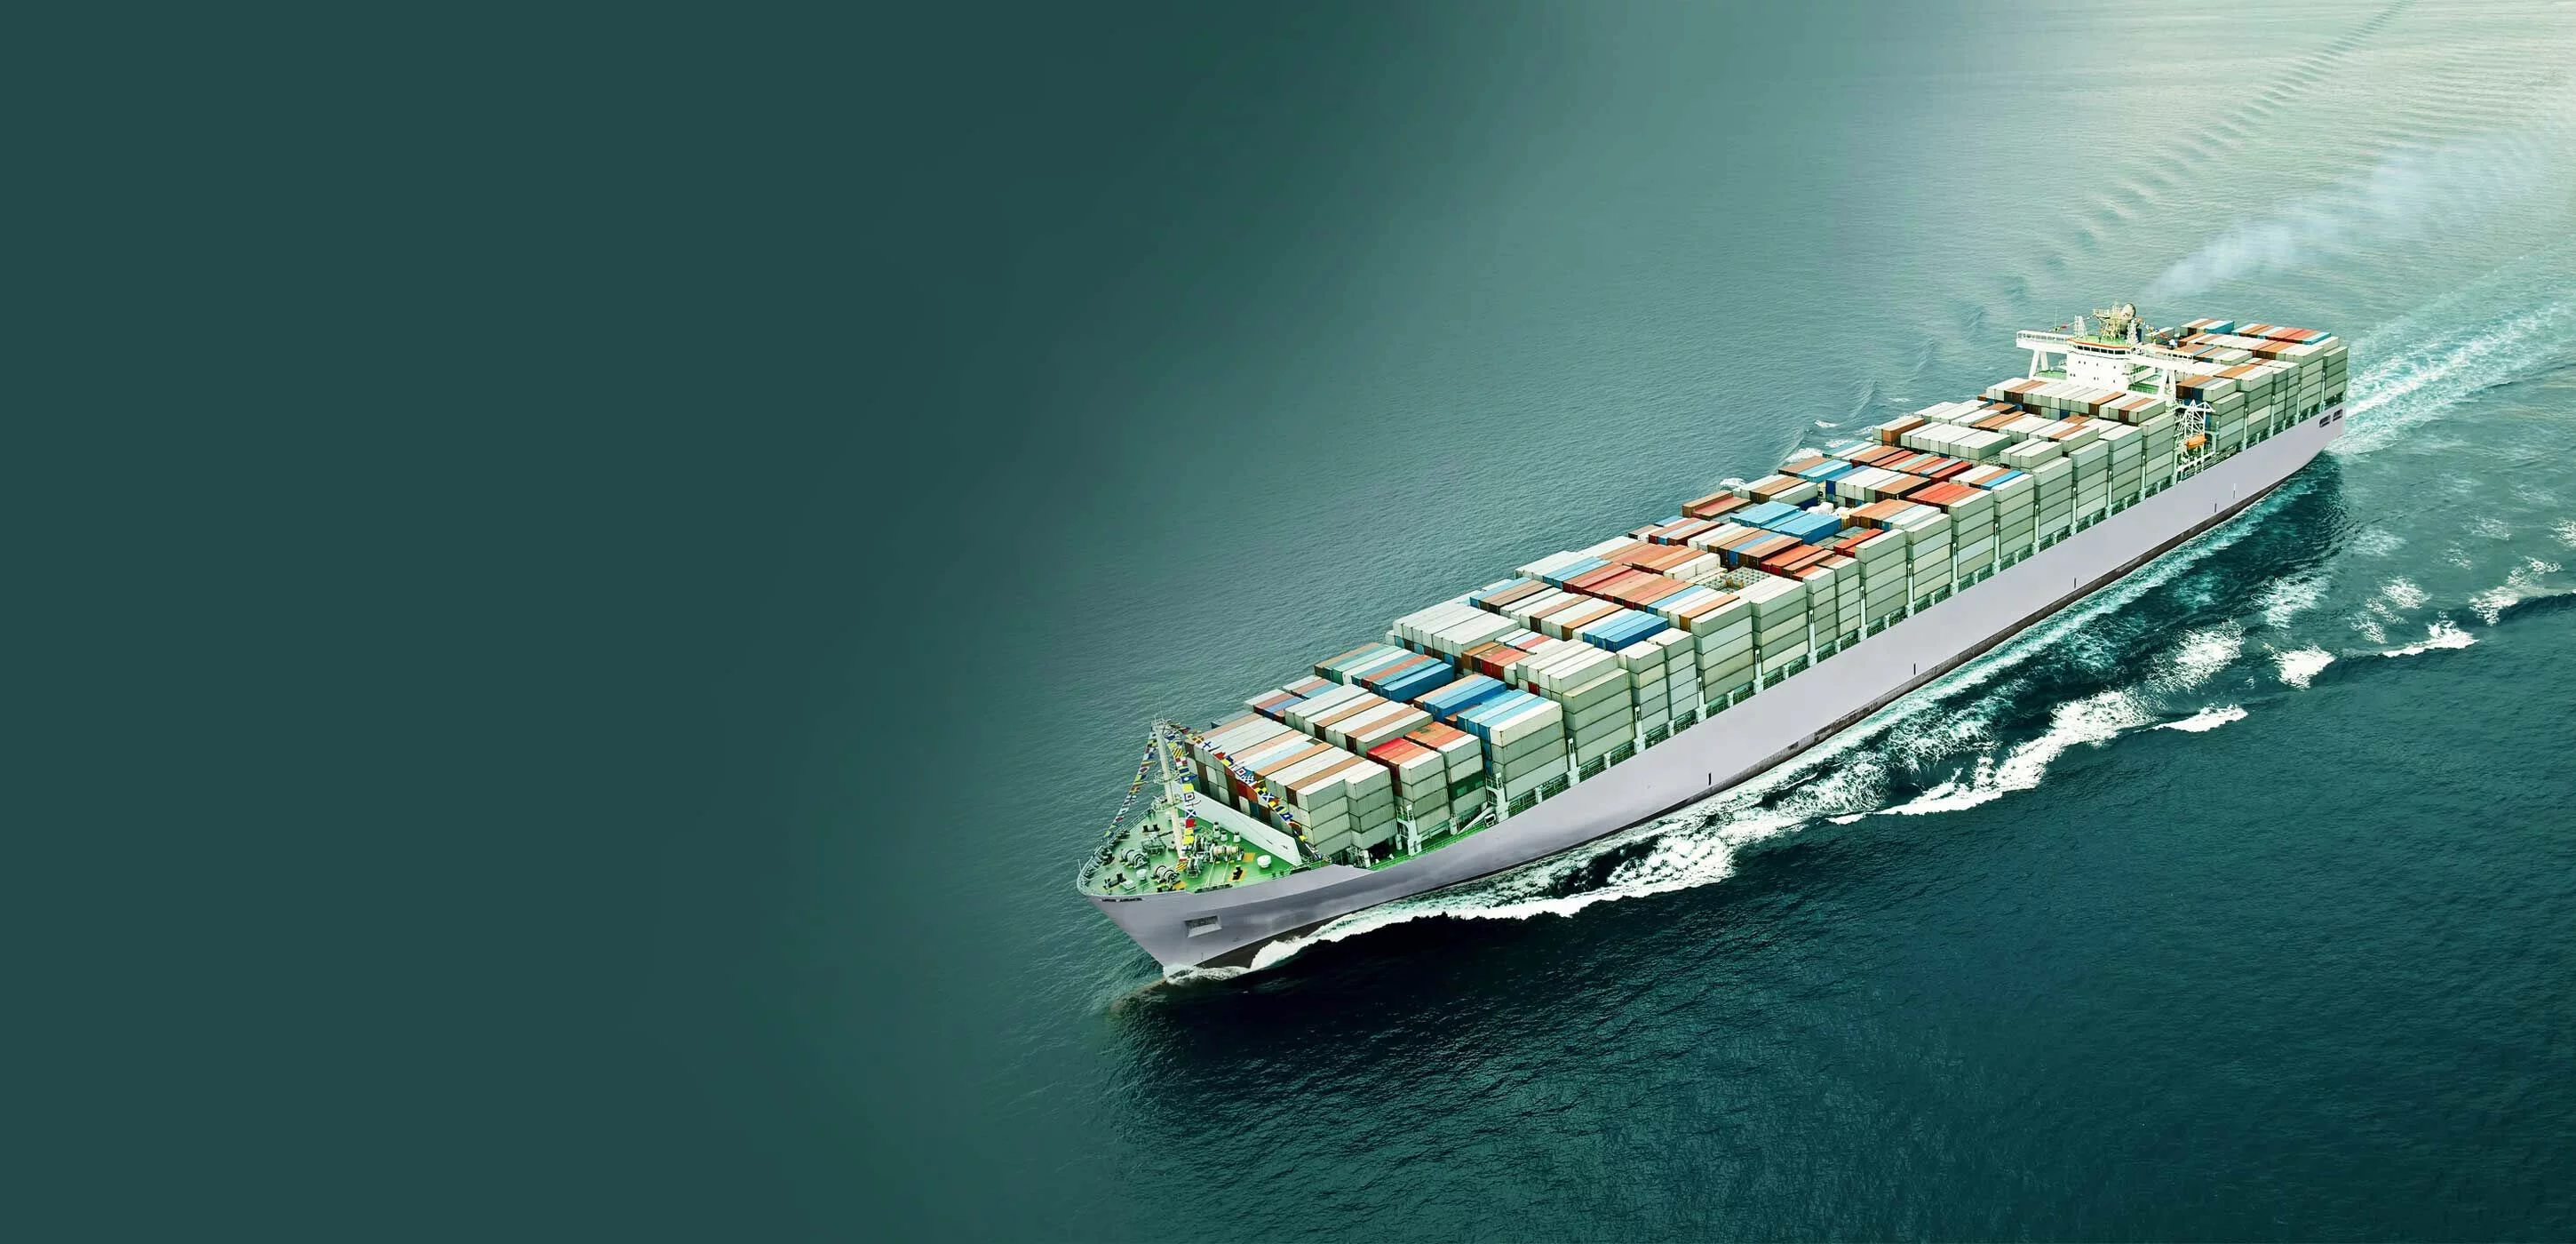 This is a container ship carrying one-way containers